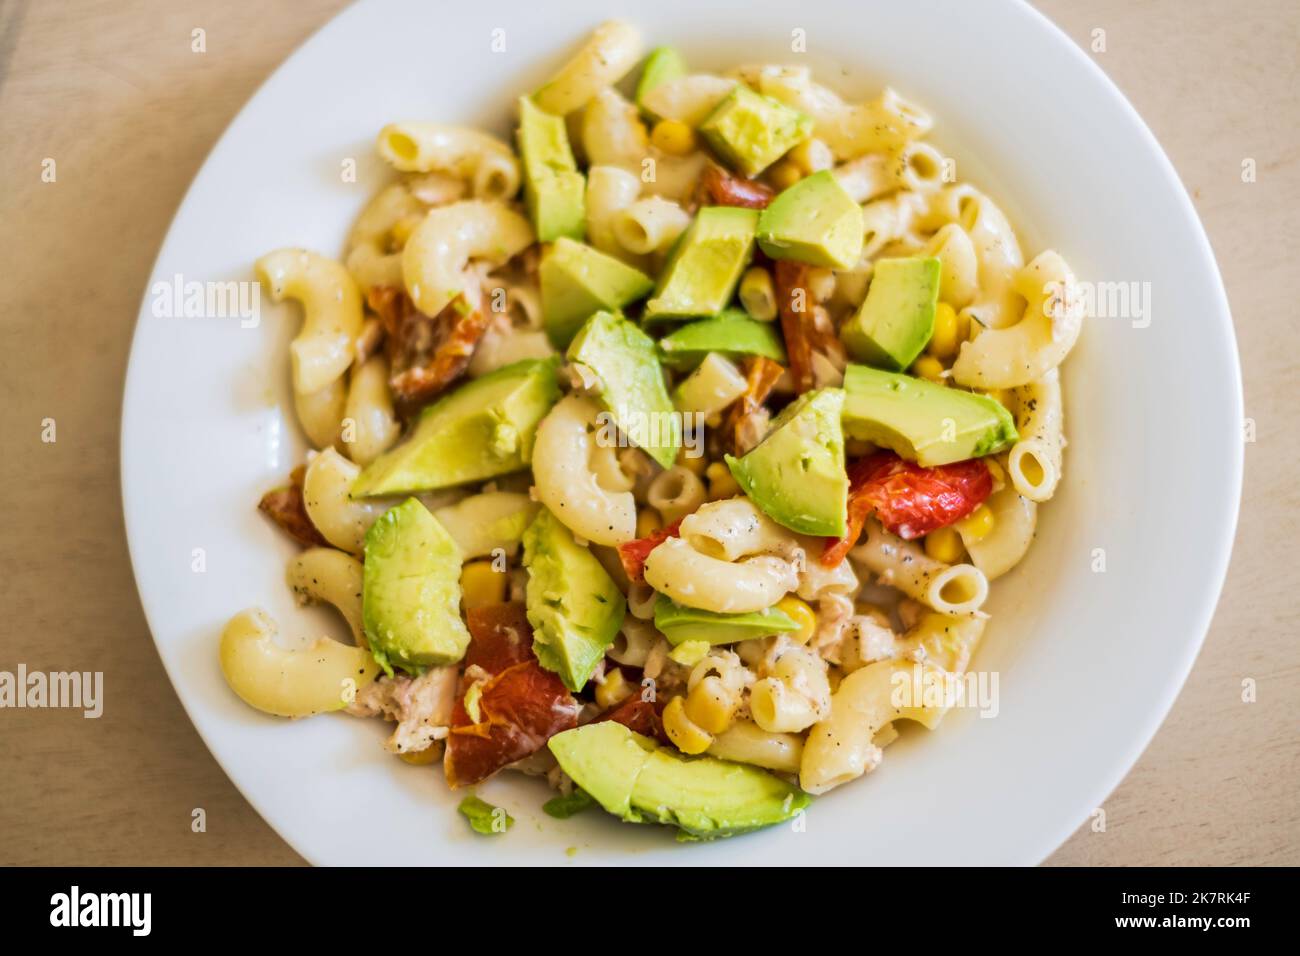 A cold pasta salad of large elbow macaroni, sliced avocados, red bell peppers and yellow corn with a light mayonaise dressing in a white dish. USA Stock Photo